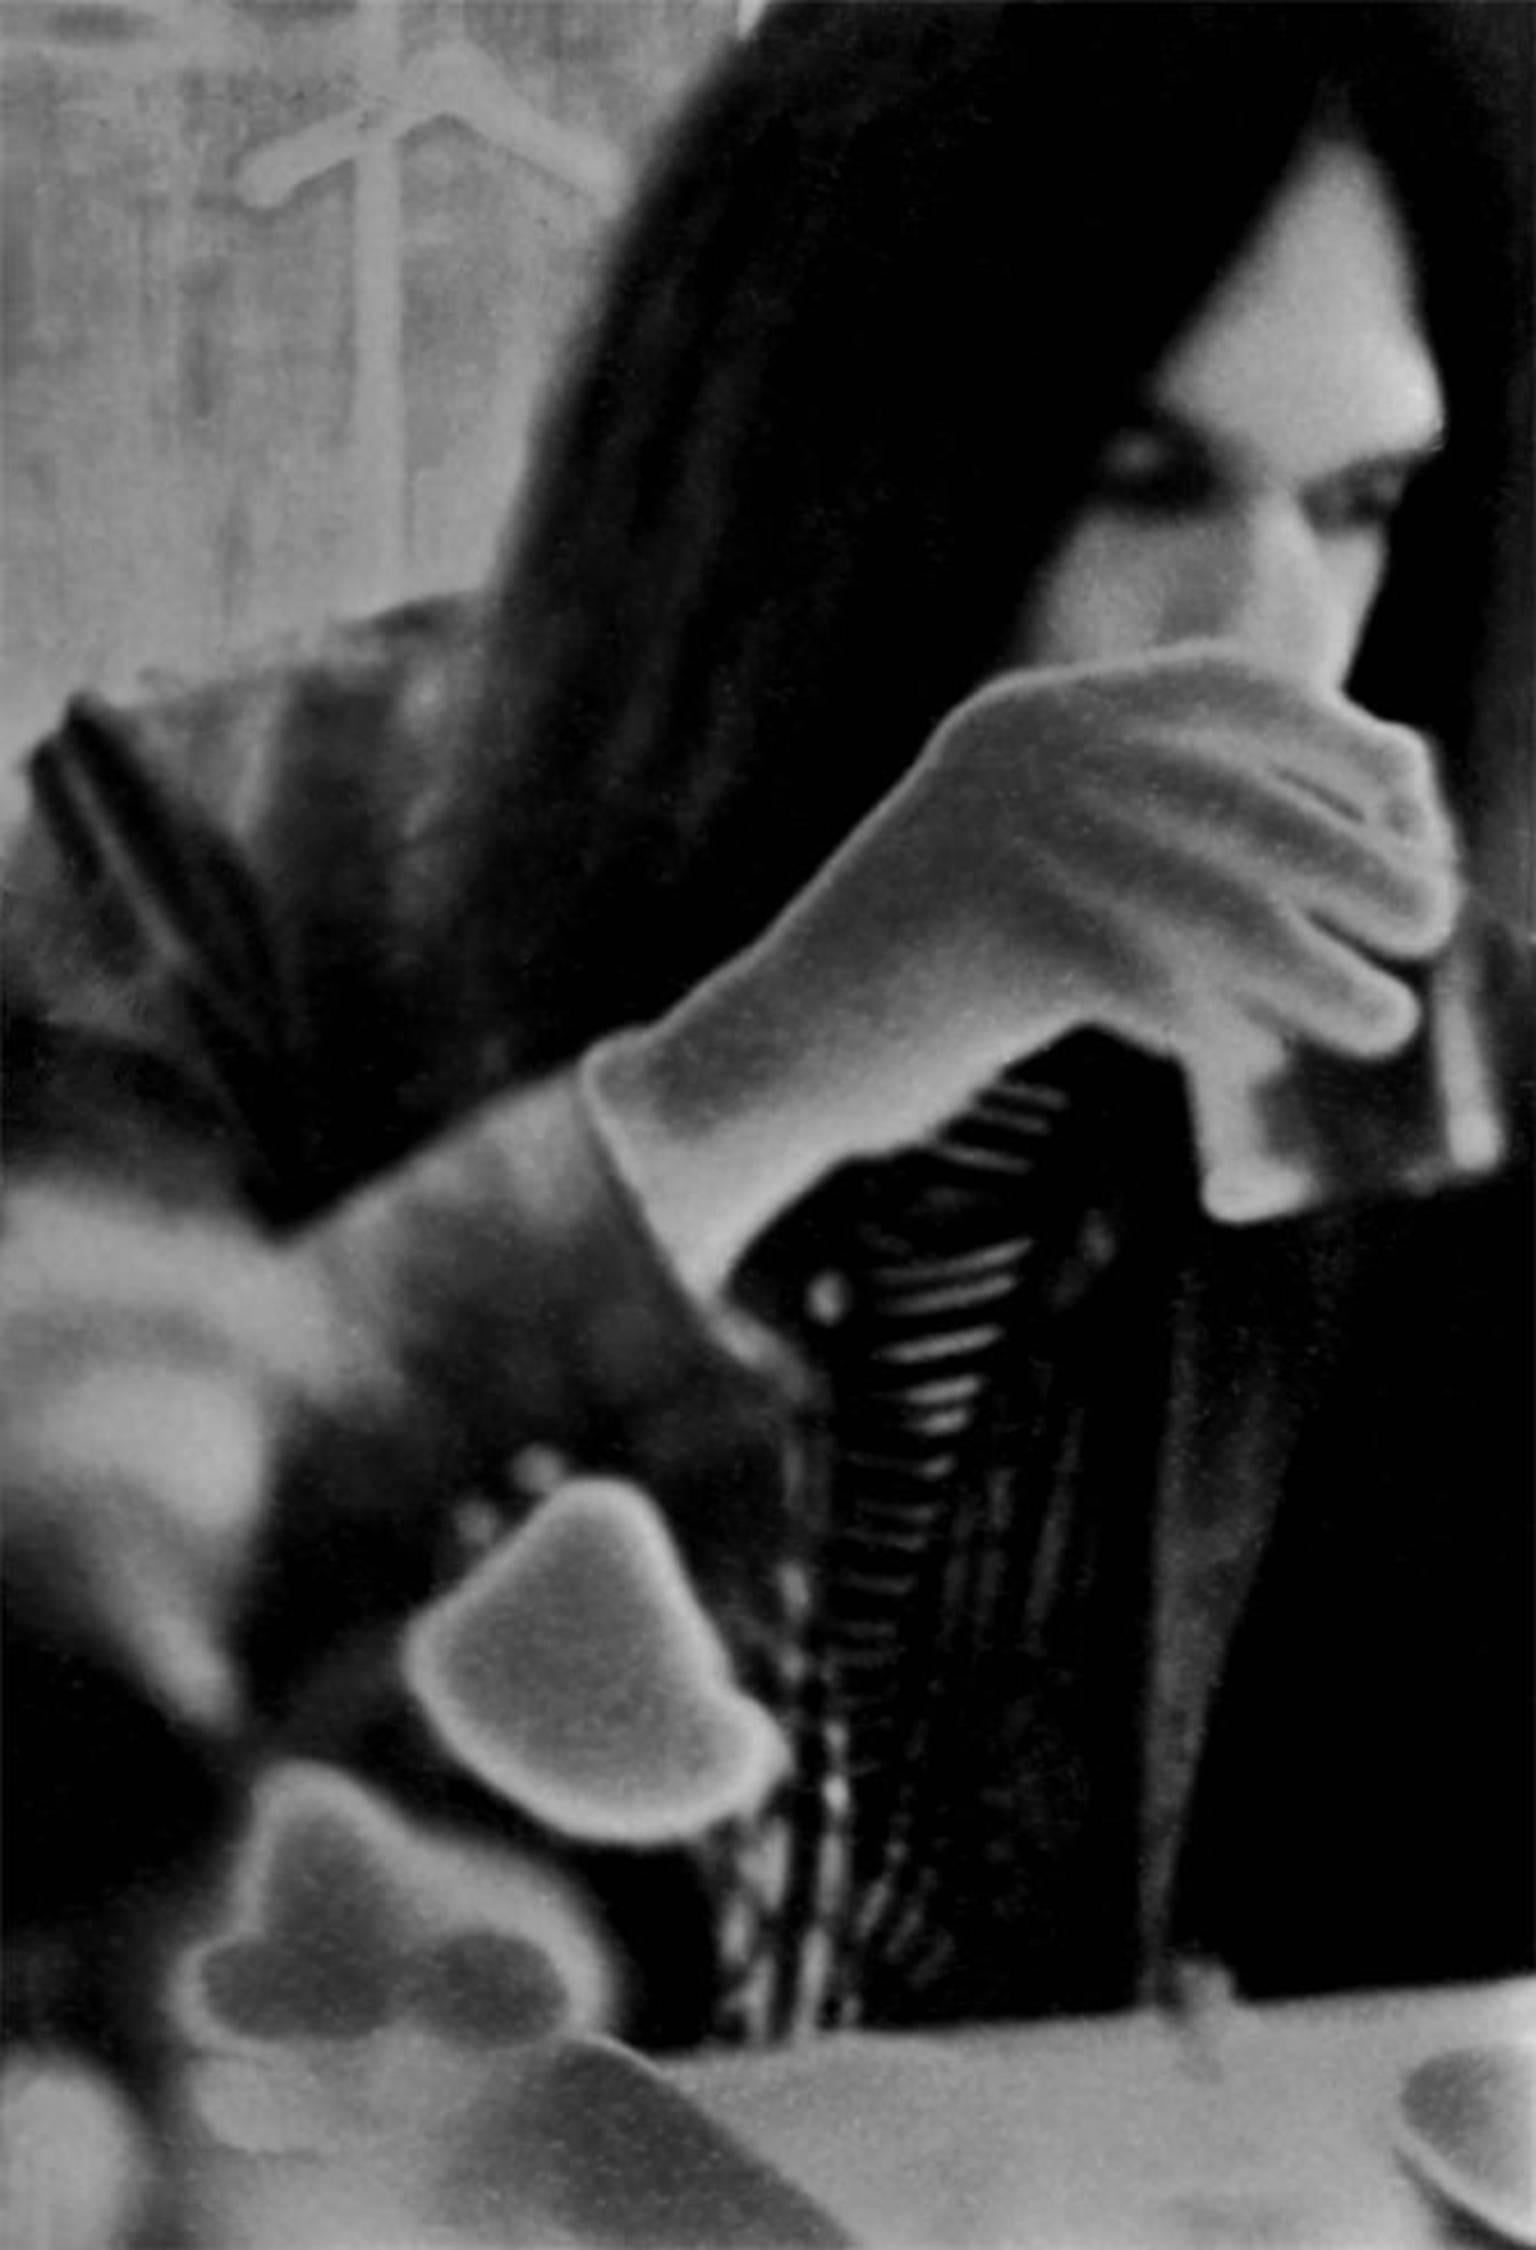 Neil Young 1971